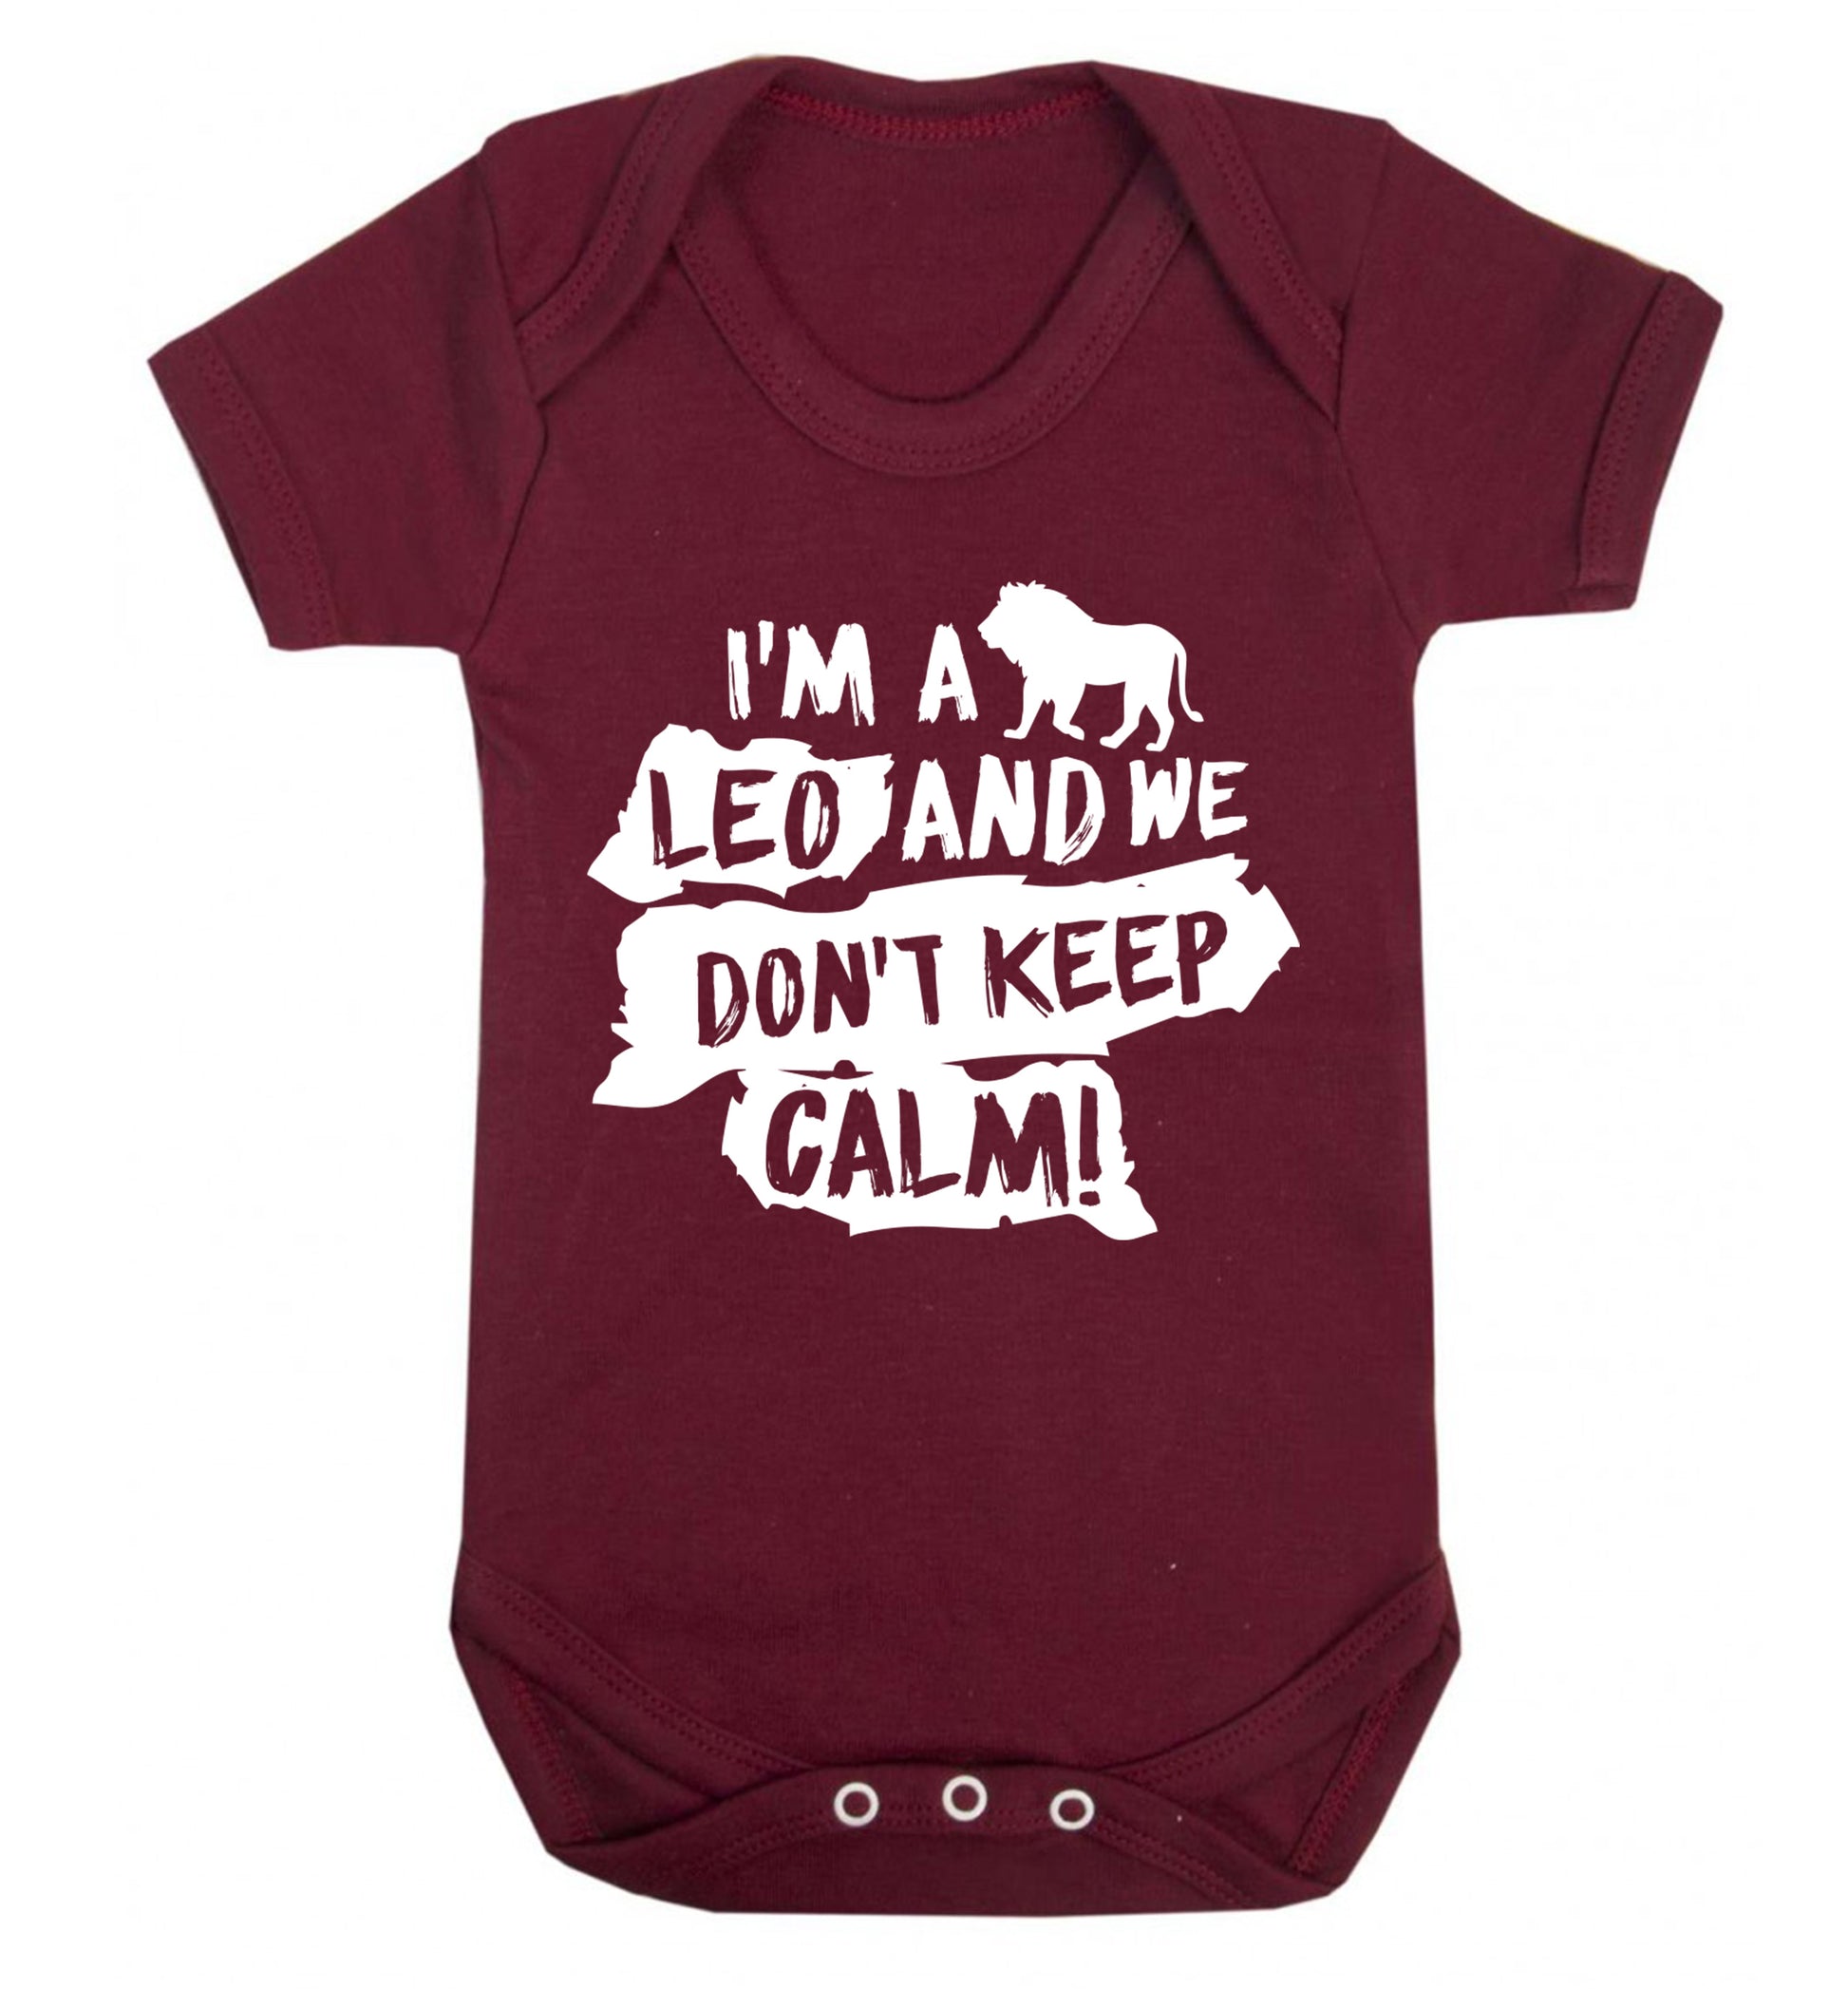 I'm a leo and we don't keep calm! Baby Vest maroon 18-24 months